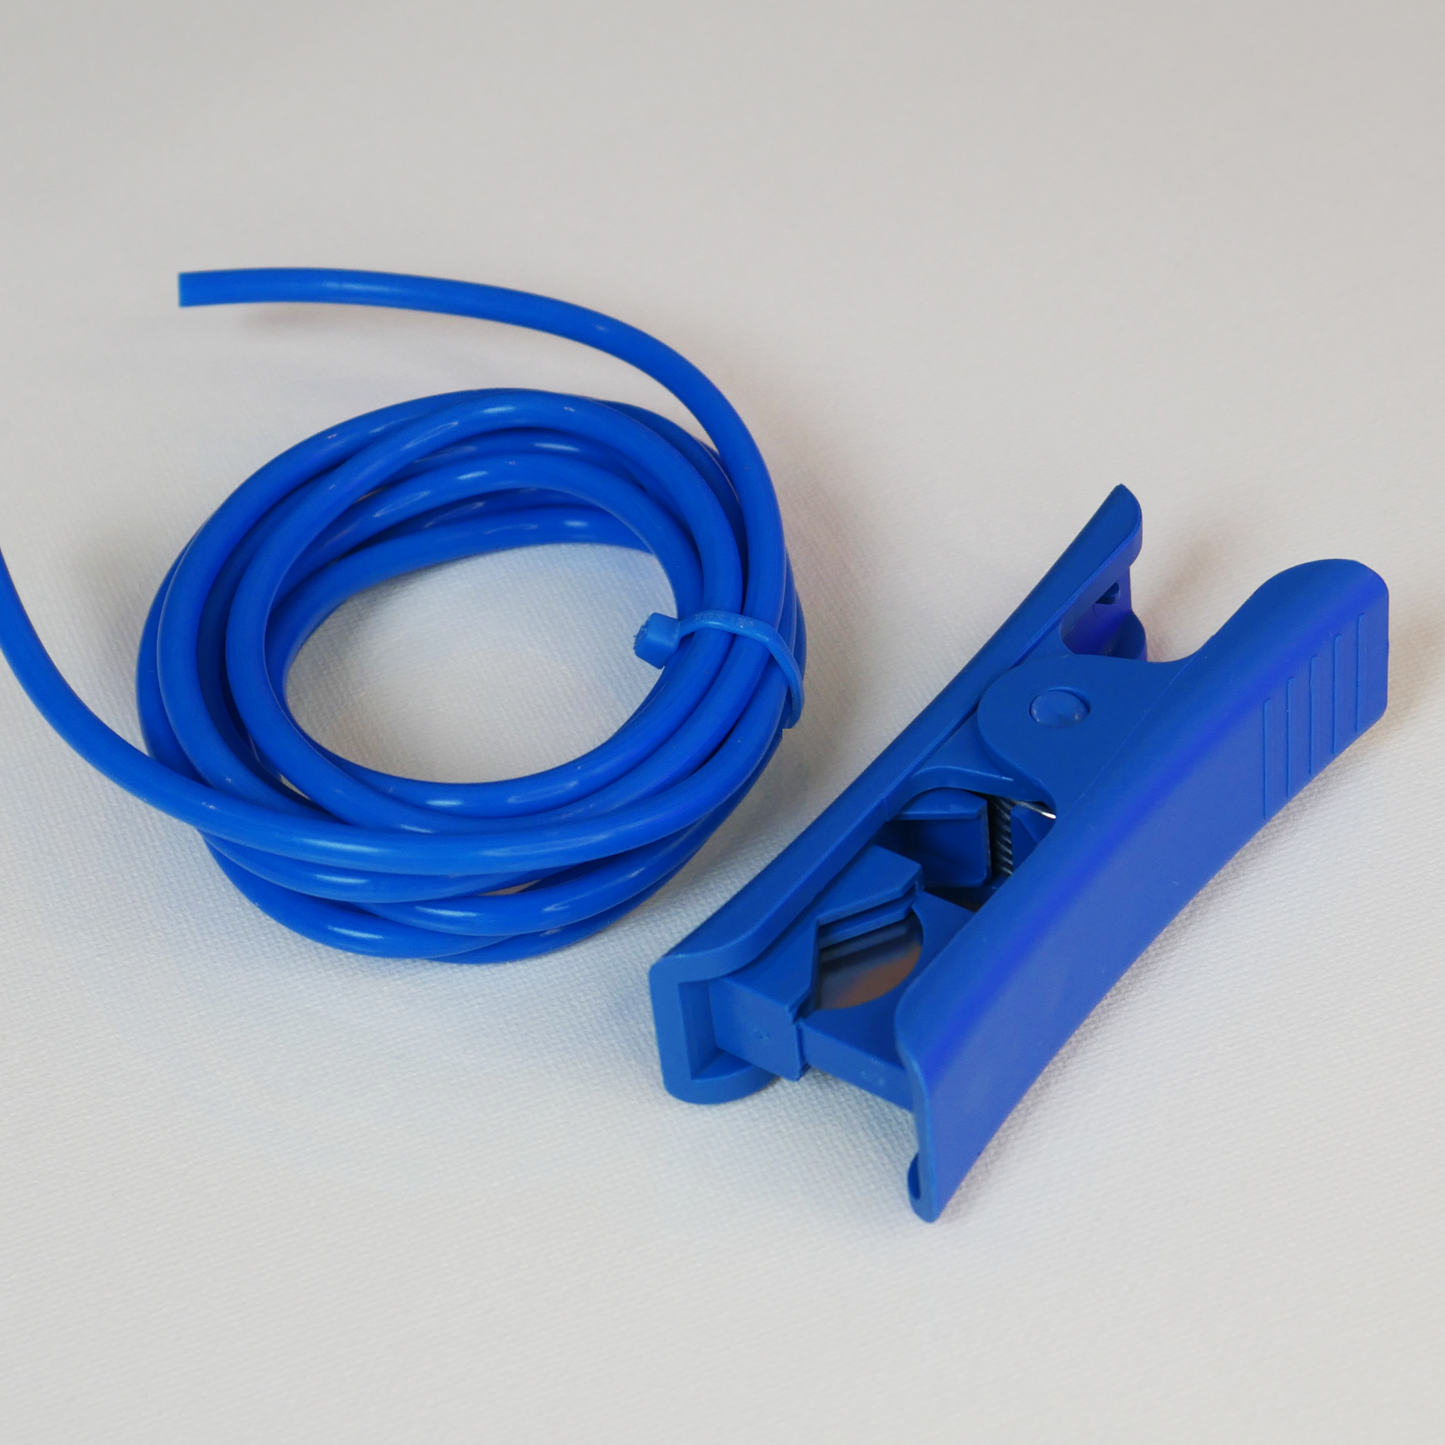 PTFE Tube (2m) and Tube Cutter